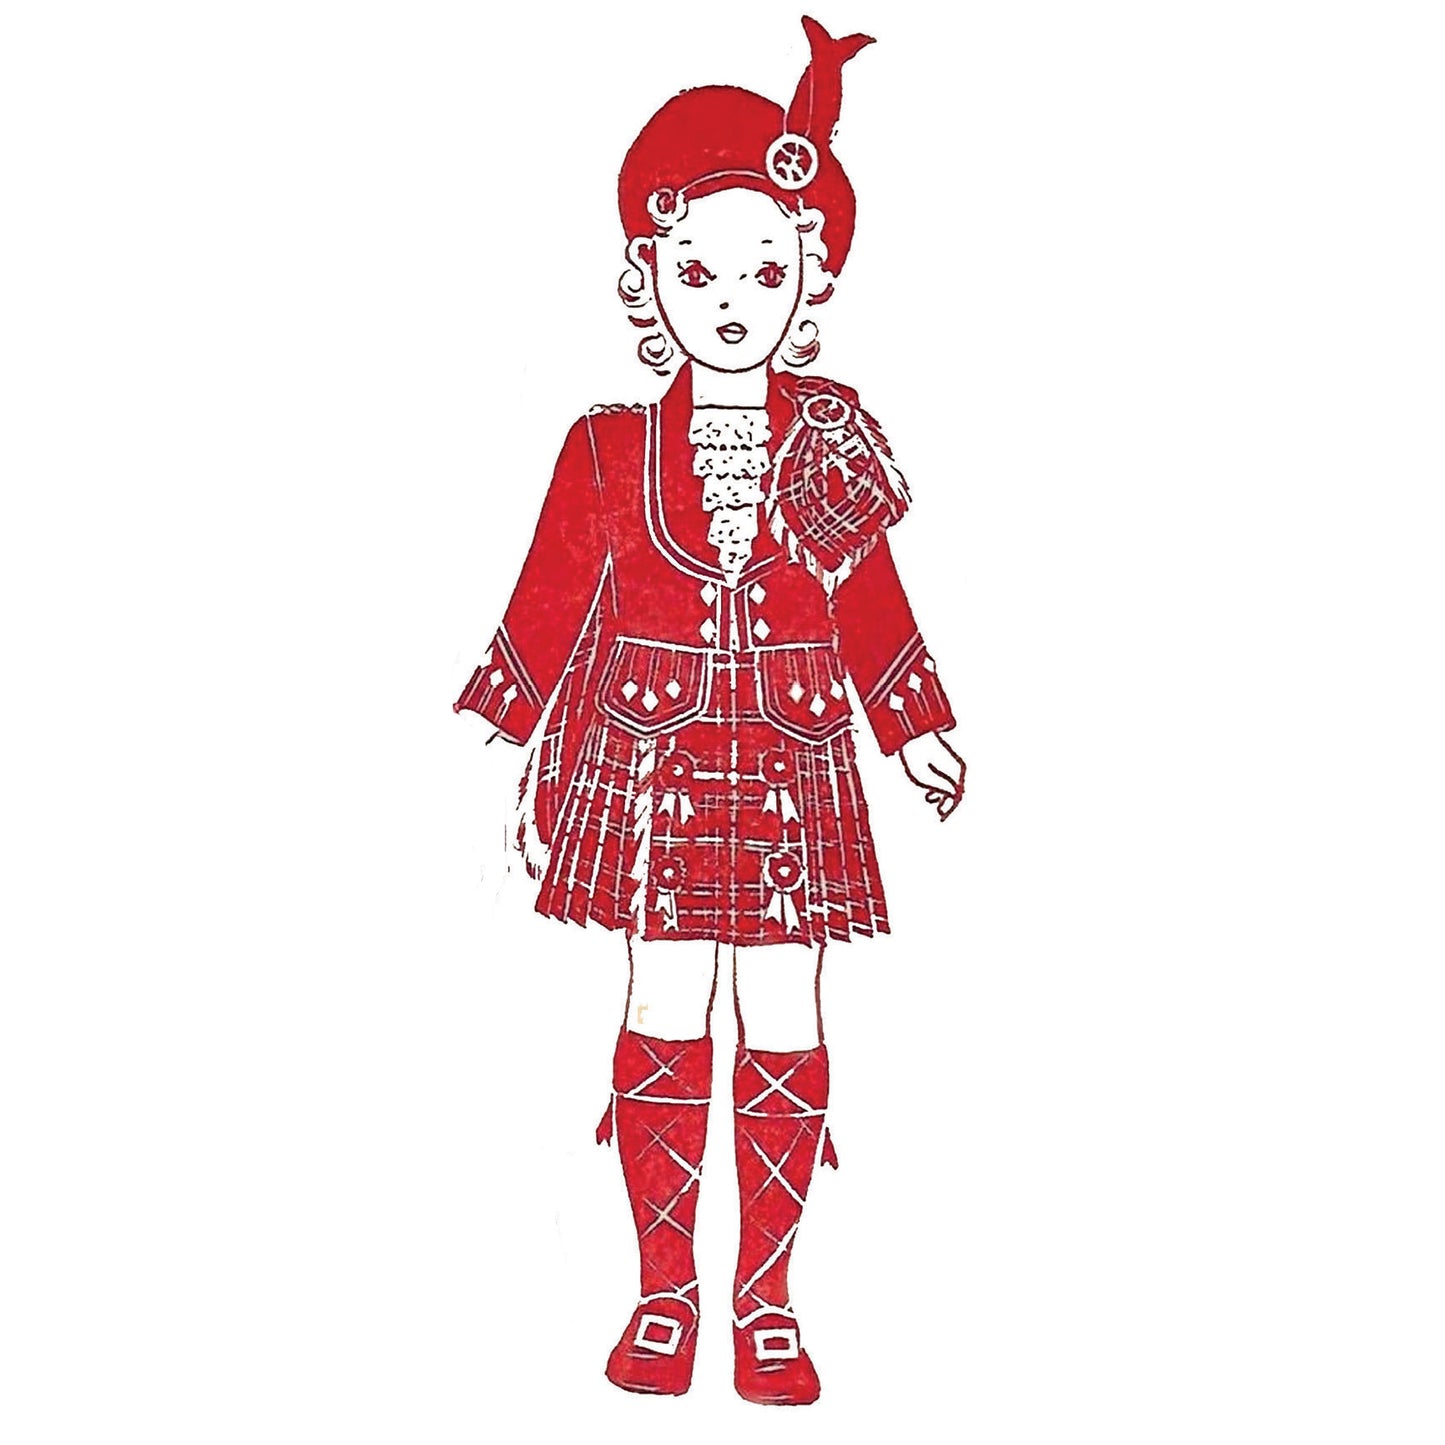 Illustration in red of child wearing Highland dress costume.